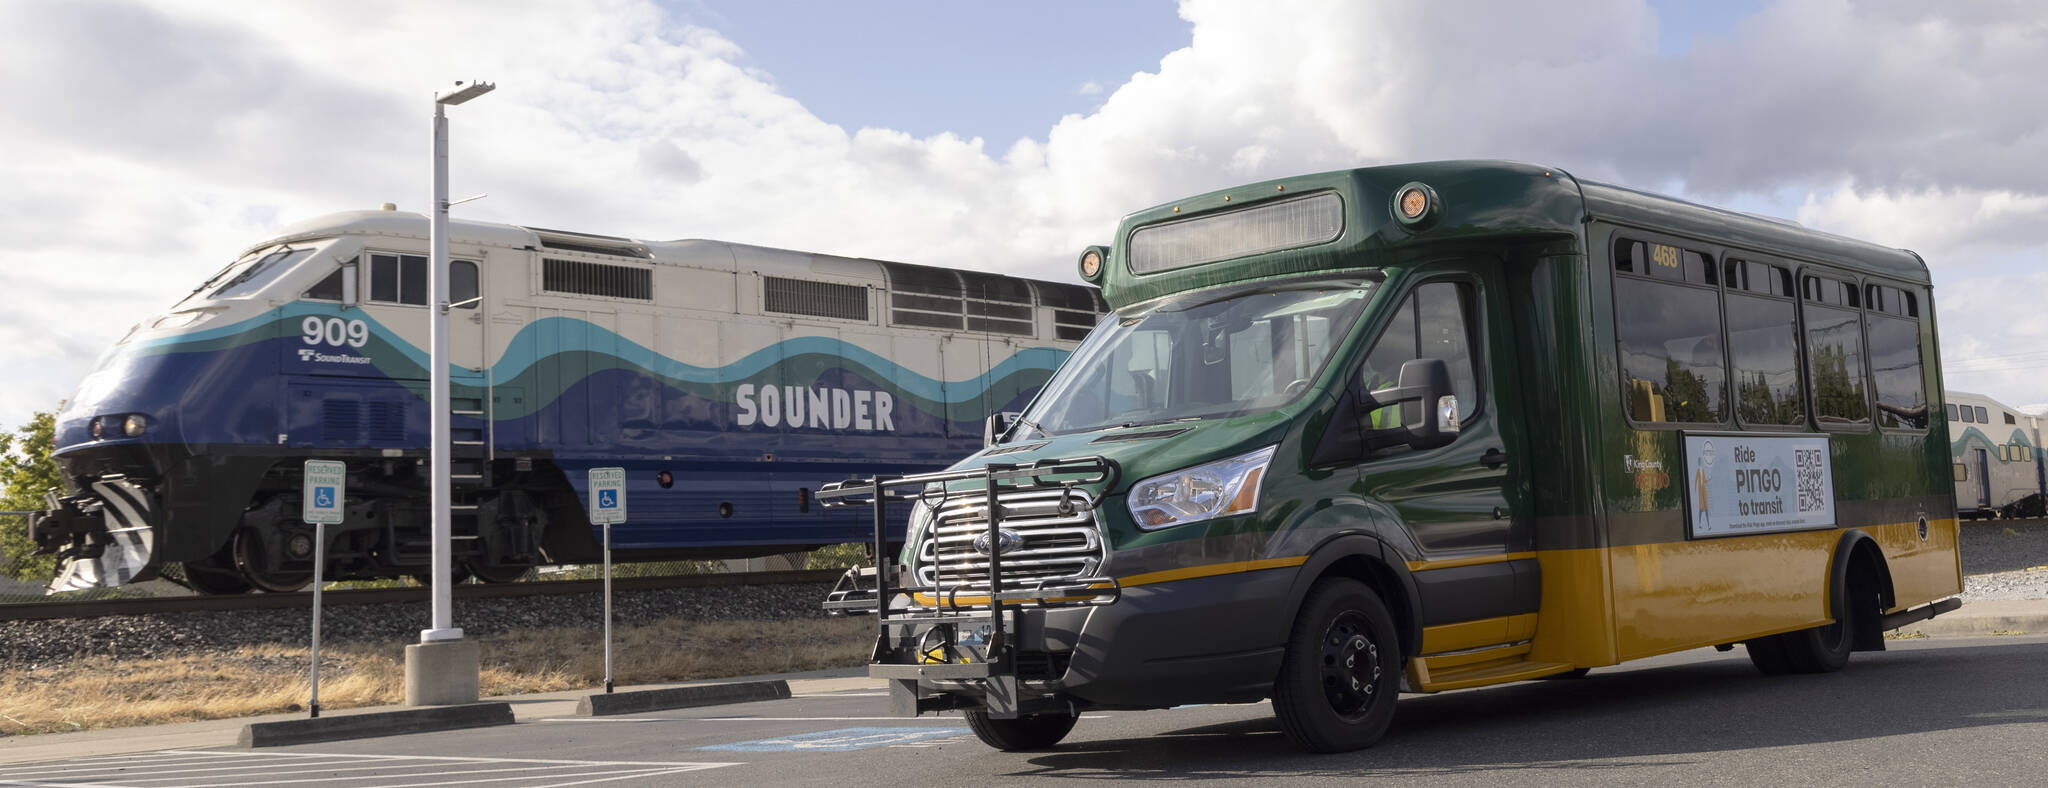 A Ride Pingo to Transit vehicle is tested Aug. 31 in Kent. COURTESY PHOTO, King County Metro